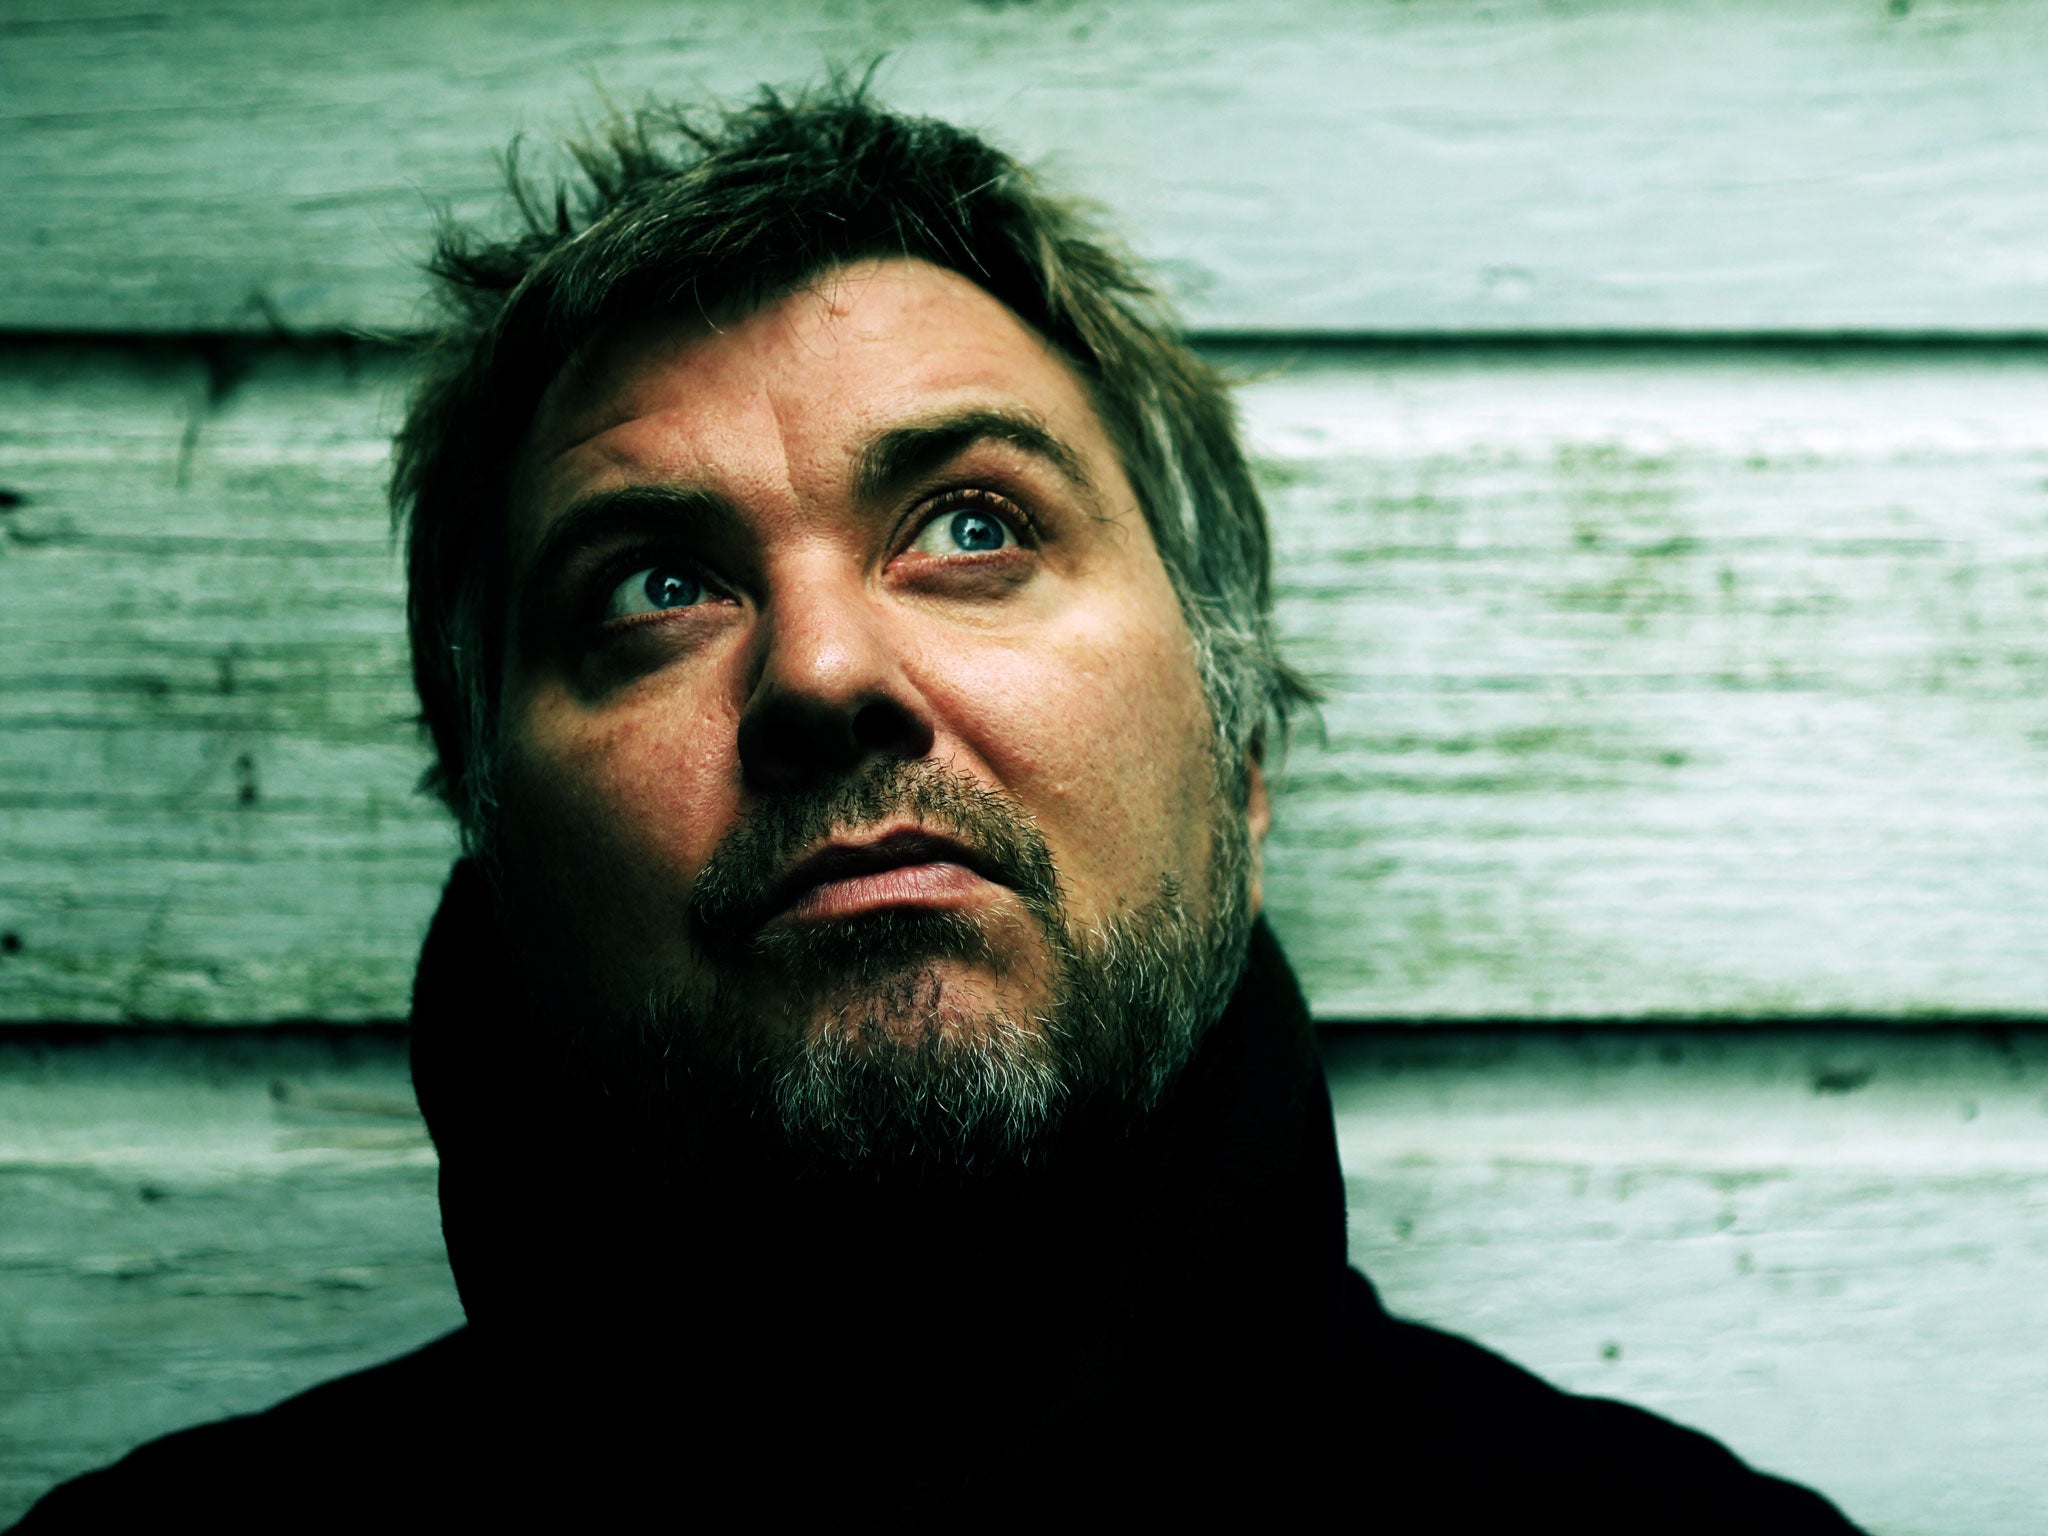 Joined at the elbow: Jimi Goodwin